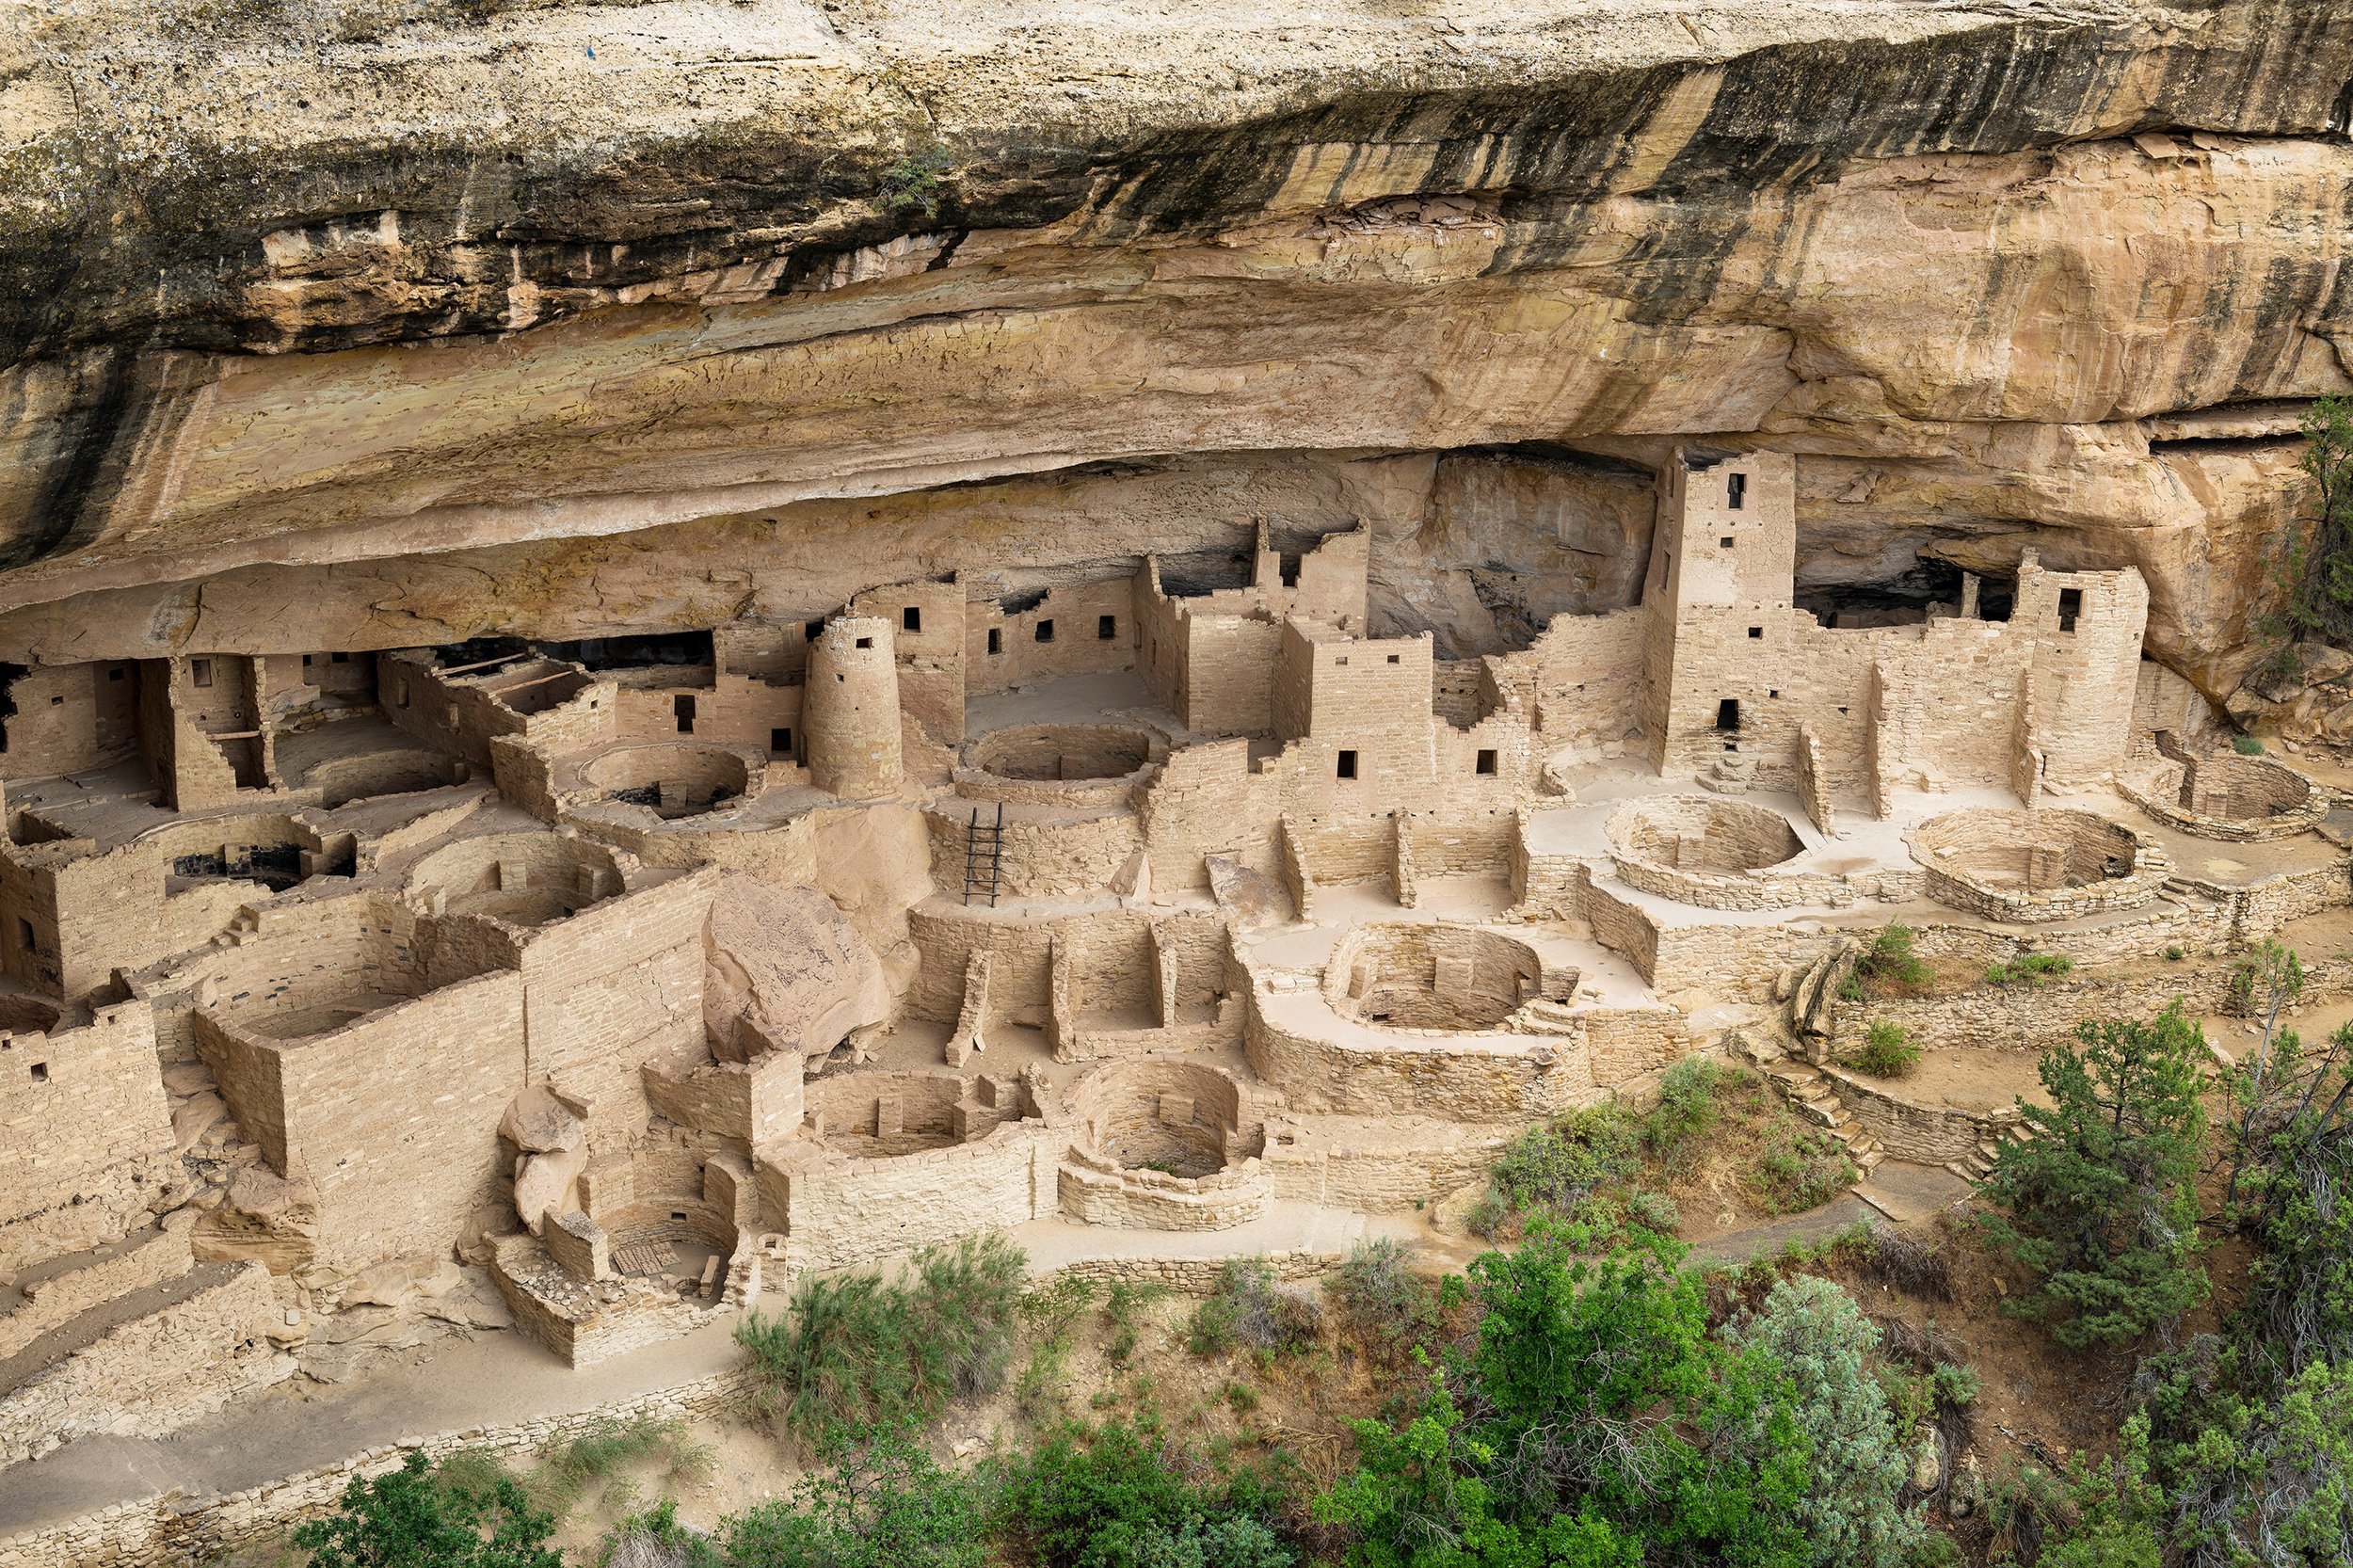 <p>This national park in Southwest Colorado is famous for cliff dwellings preserved from the 1190s. The park is a <a href="https://blog.cheapism.com/usa-tourist-attractions-3616/">cheap, must-see destination</a>, says Joost Schreve, co-founder and CEO of the travel site <a href="https://www.kimkim.com">kimkim</a>, but come in summer and you'll be touring the cramped spaces with hordes of other visitors.</p>